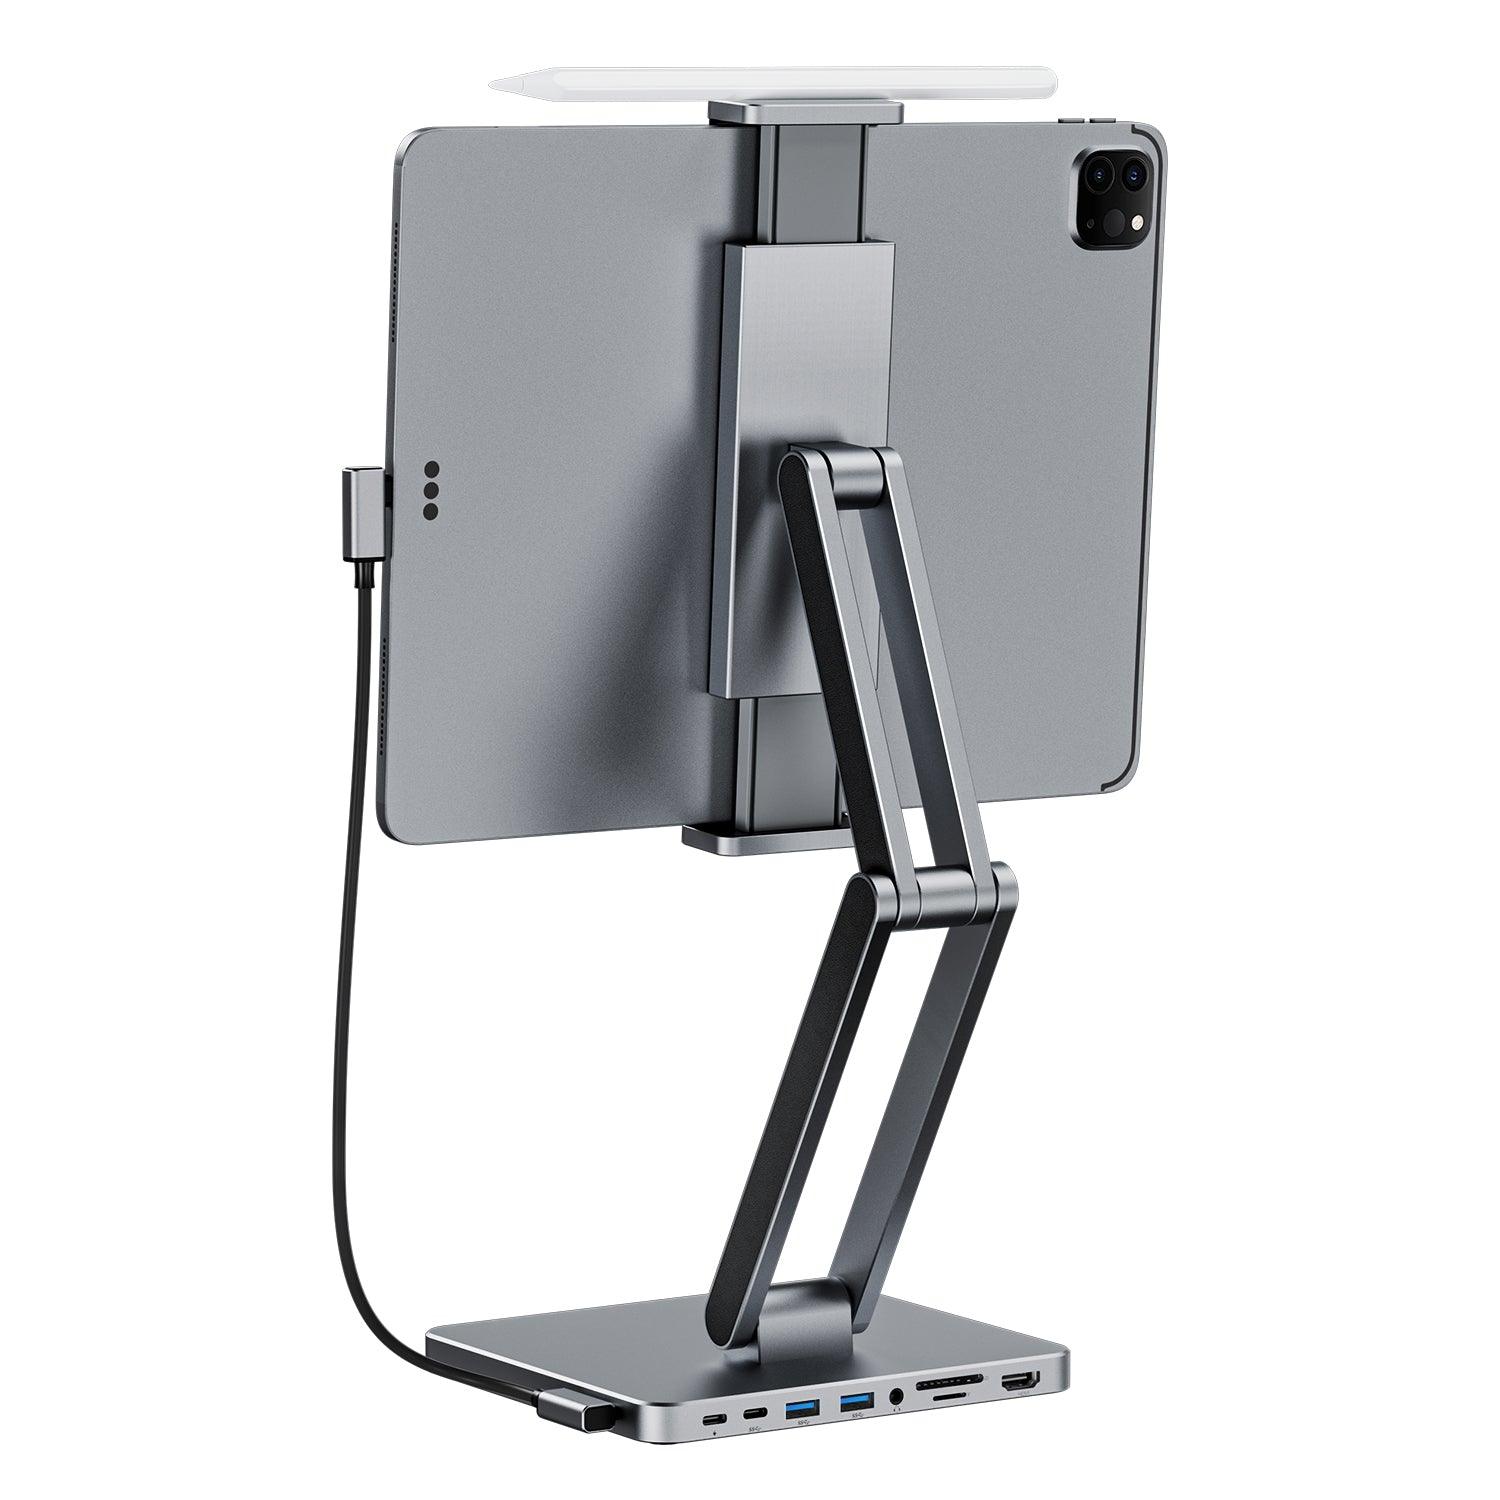 INVZI MagHub 3: 8-in-1 Docking Station Stand for iPad and Tablet - INVZI